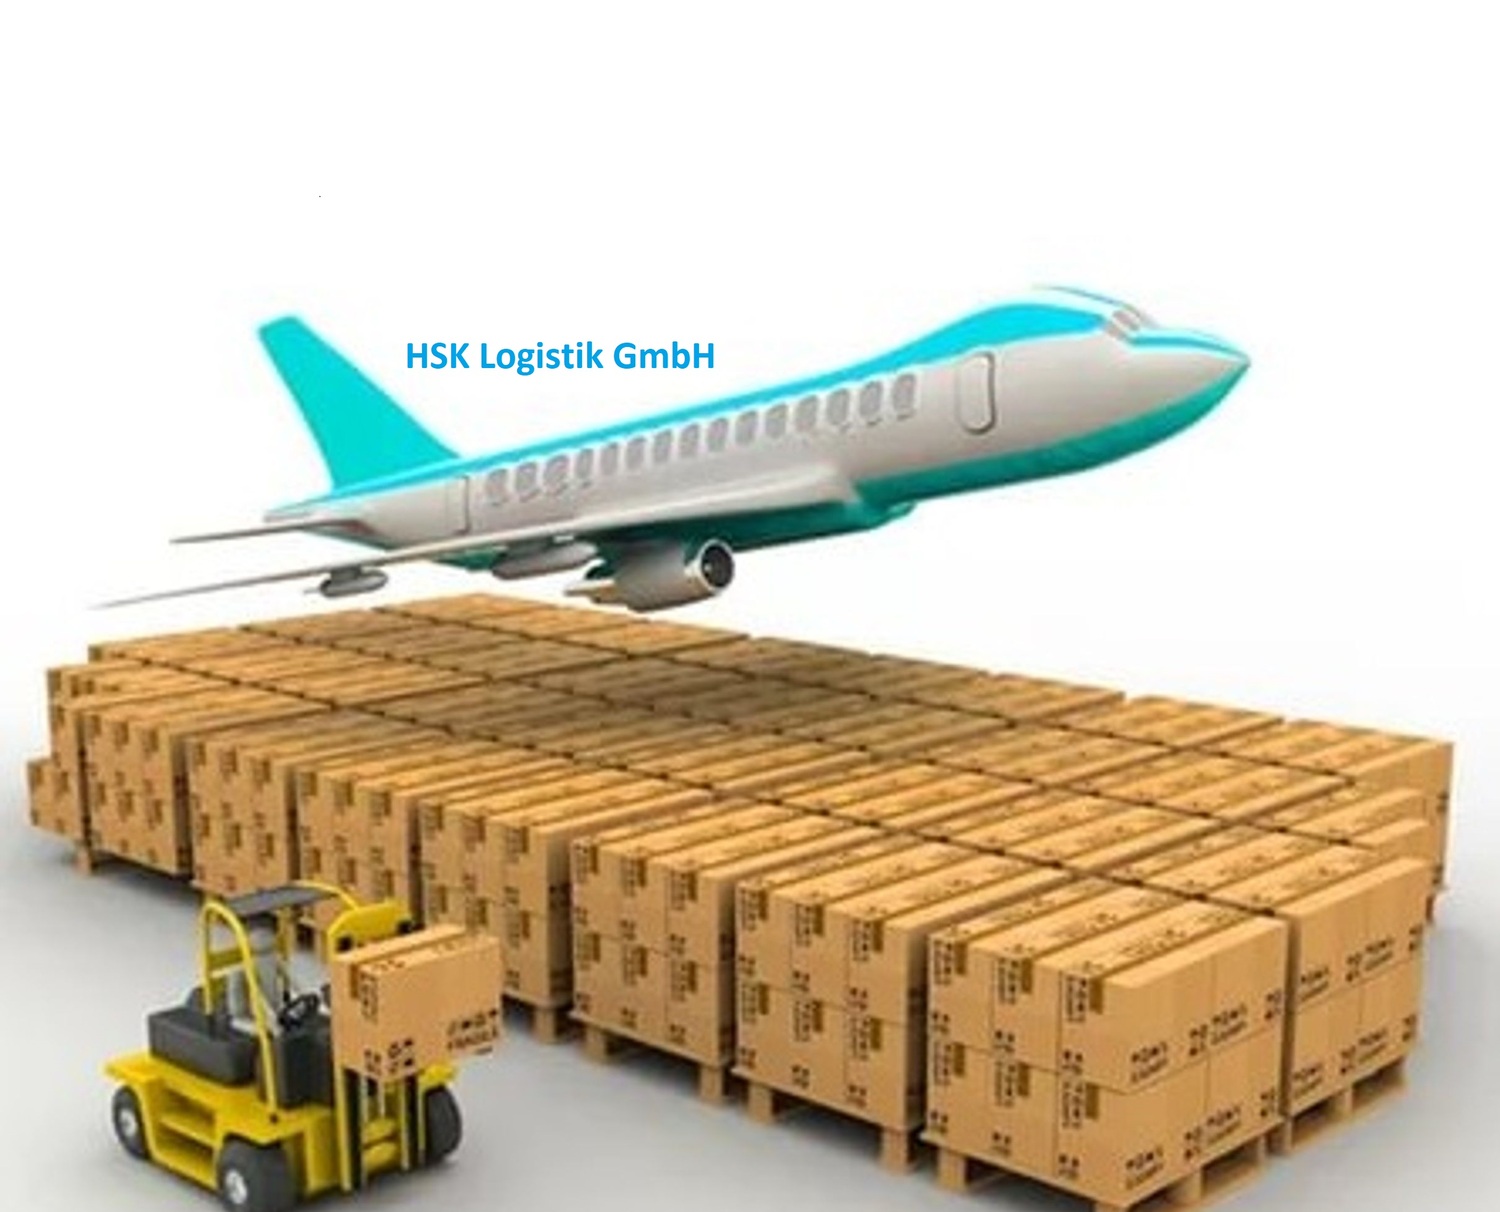 <span style="font-weight: bold;">AIR FREIGHT</span><br>